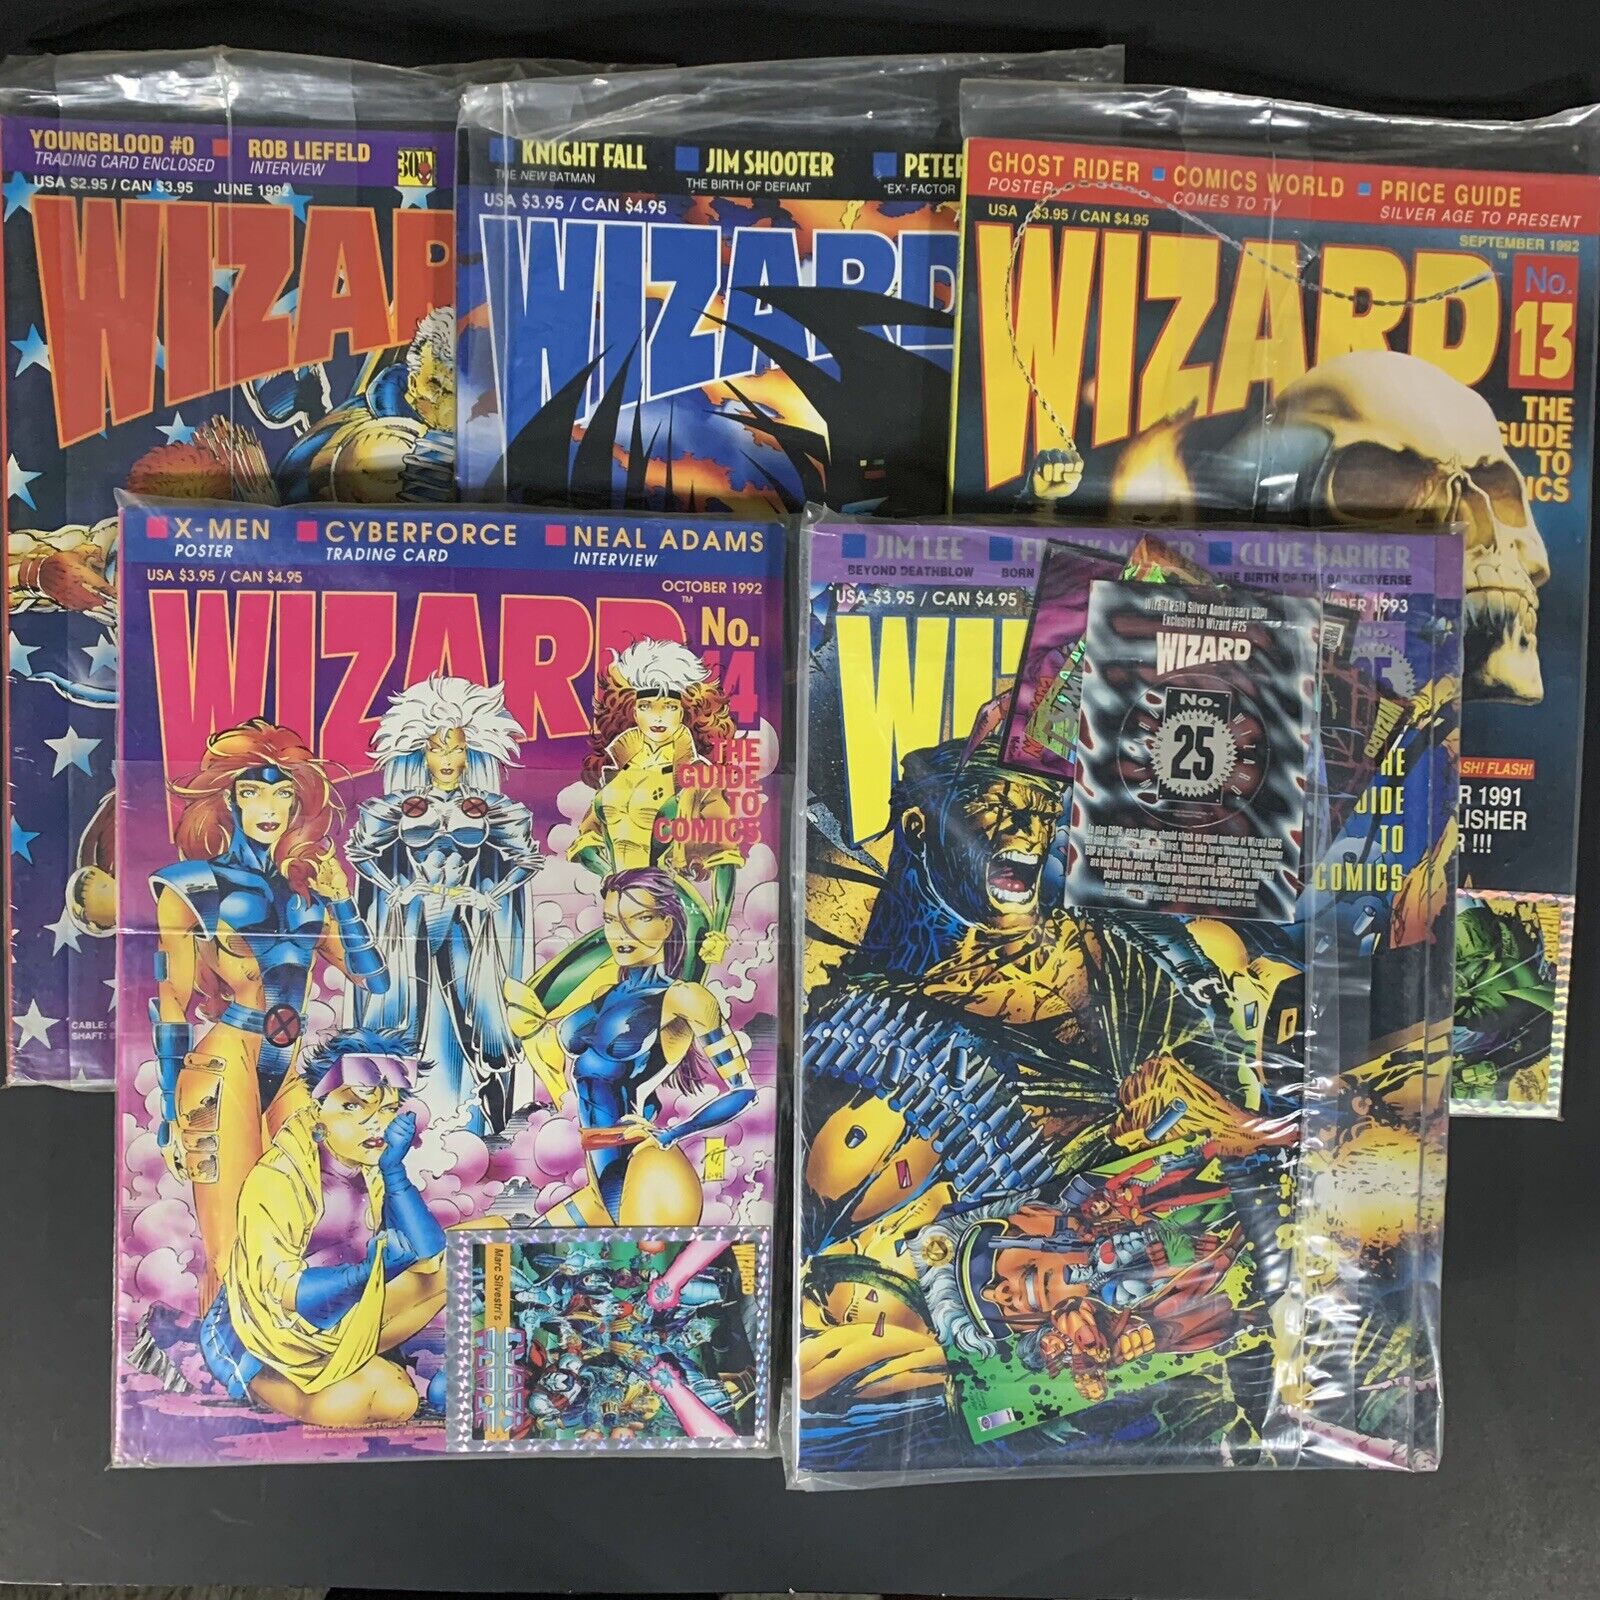 WIZARD The Guide To Comics Lot #10, 13, 14, 24, 25 - SEALED